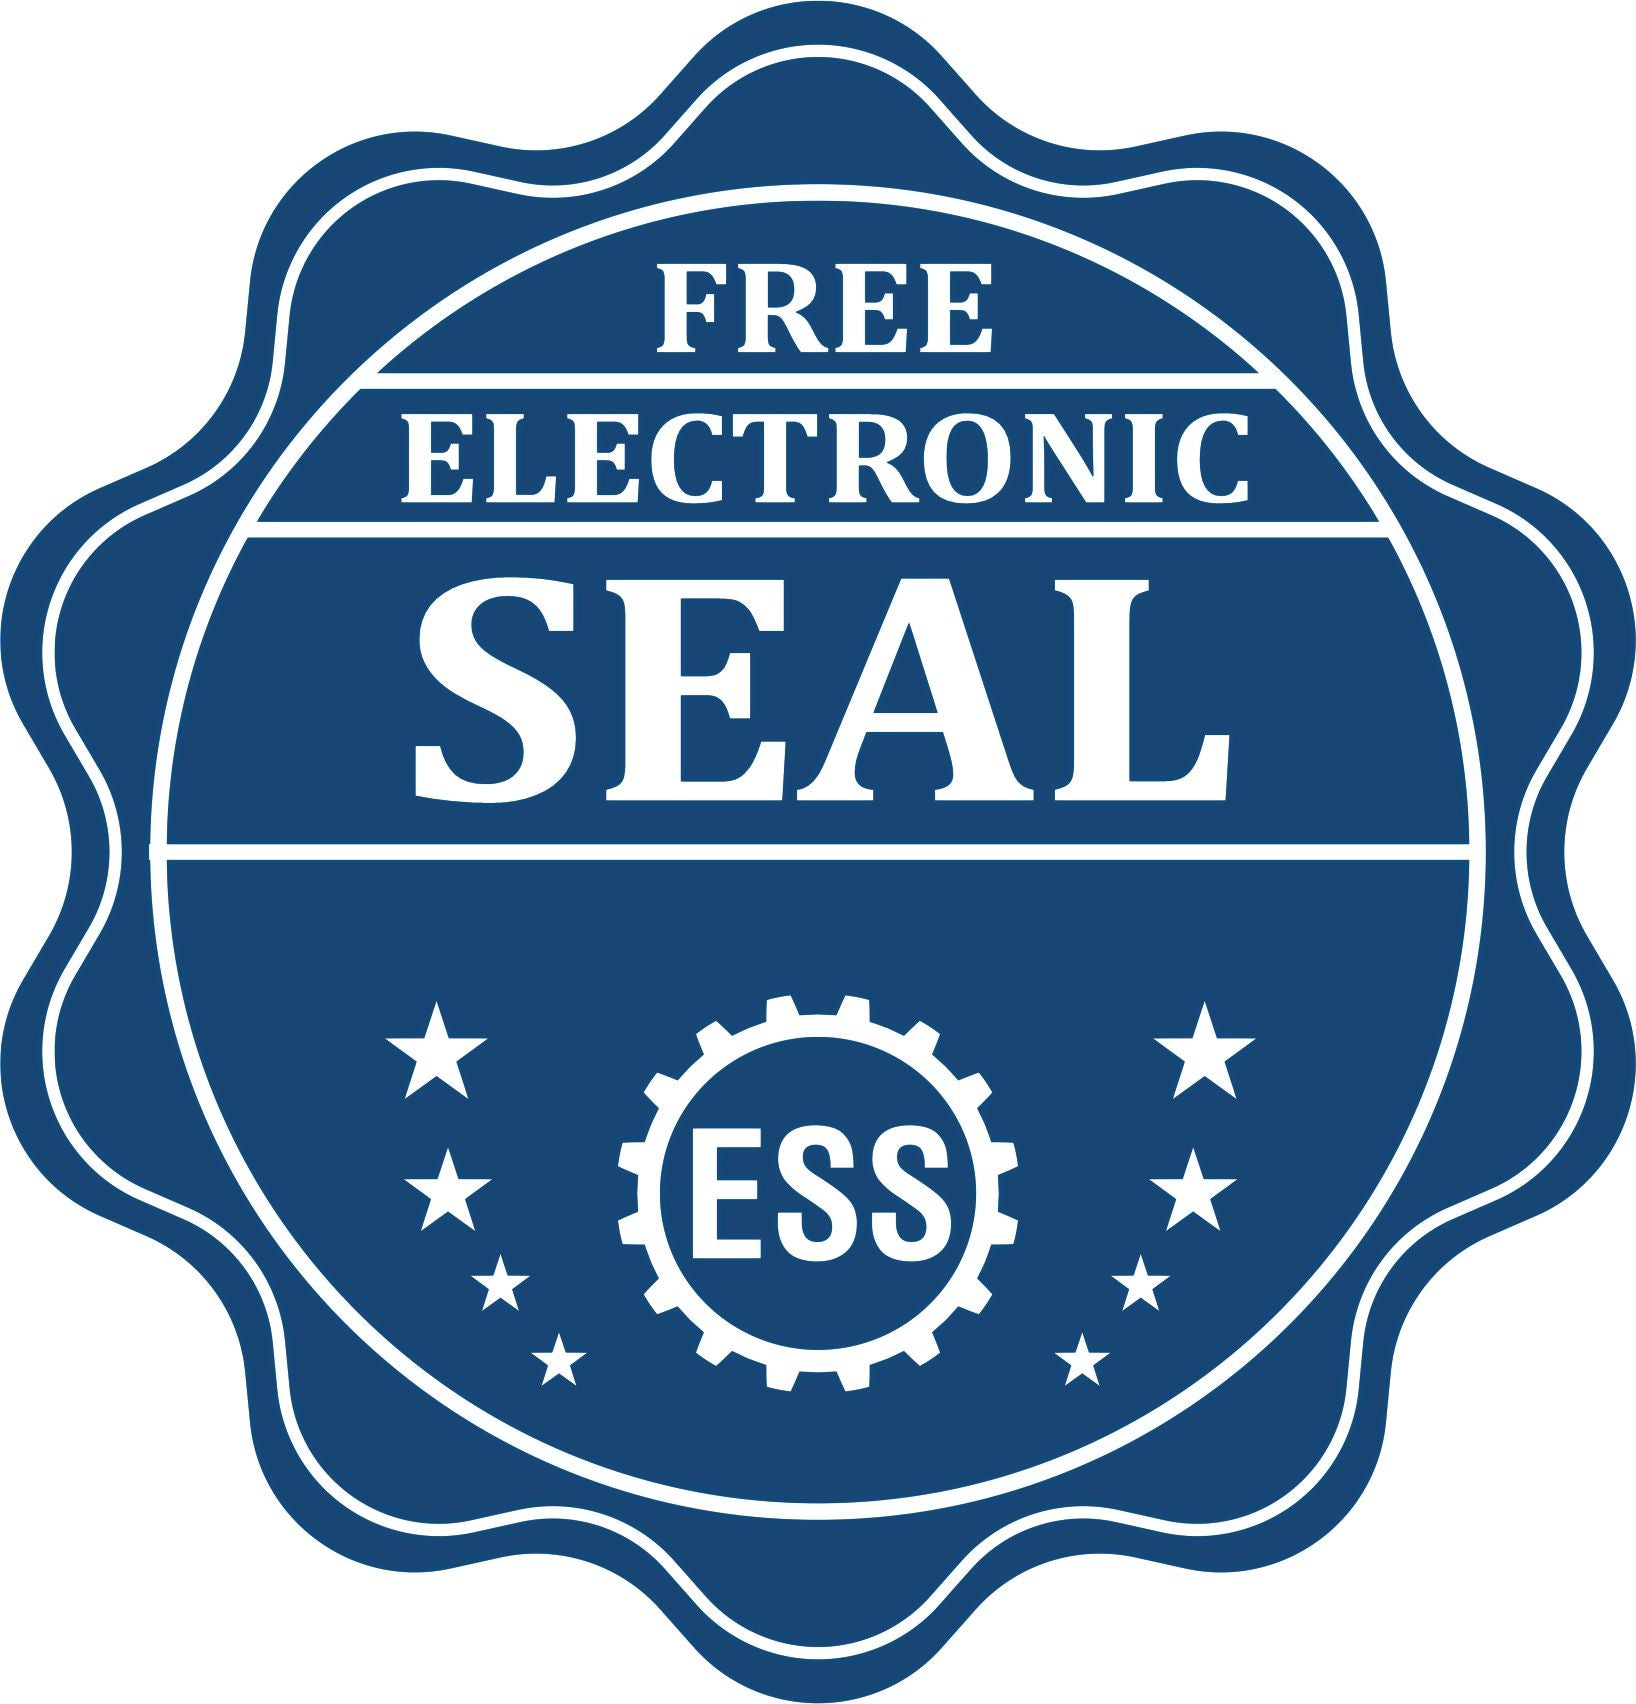 A badge showing a free electronic seal for the Premium MaxLight Pre-Inked Maryland Geology Stamp with stars and the ESS gear on the emblem.